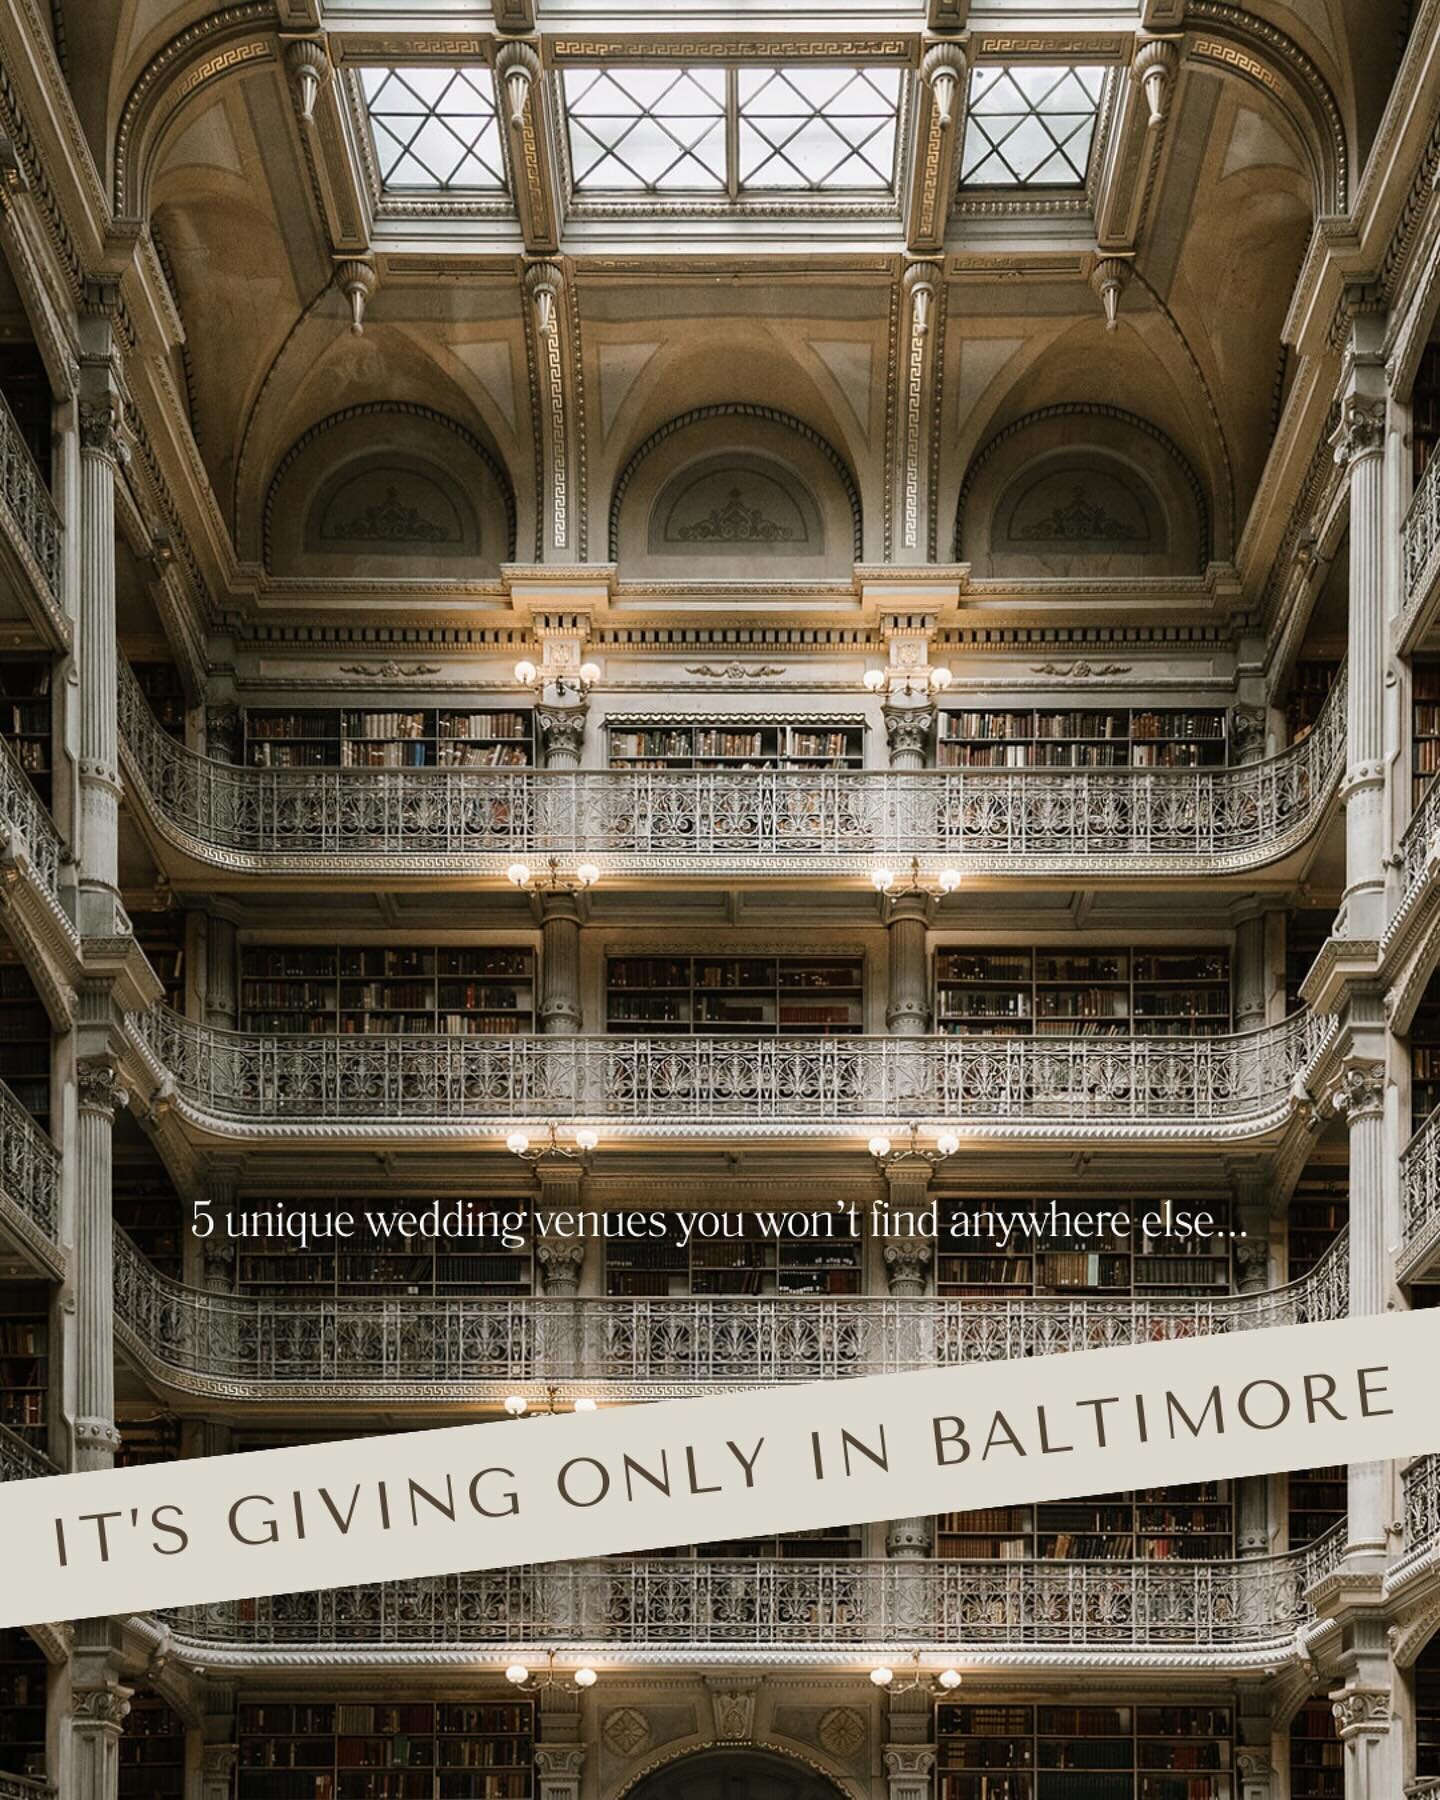 Sharing 5 unique wedding venues that you can only find in Baltimore&hellip; 
(and for the first 2, I&rsquo;m offering a limited time discount on coverage 🤩&hellip; 👀😮)

1. PEABODY LIBRARY @georgepeabodylibrary   &ldquo;A cathedral of books&rdquo; 